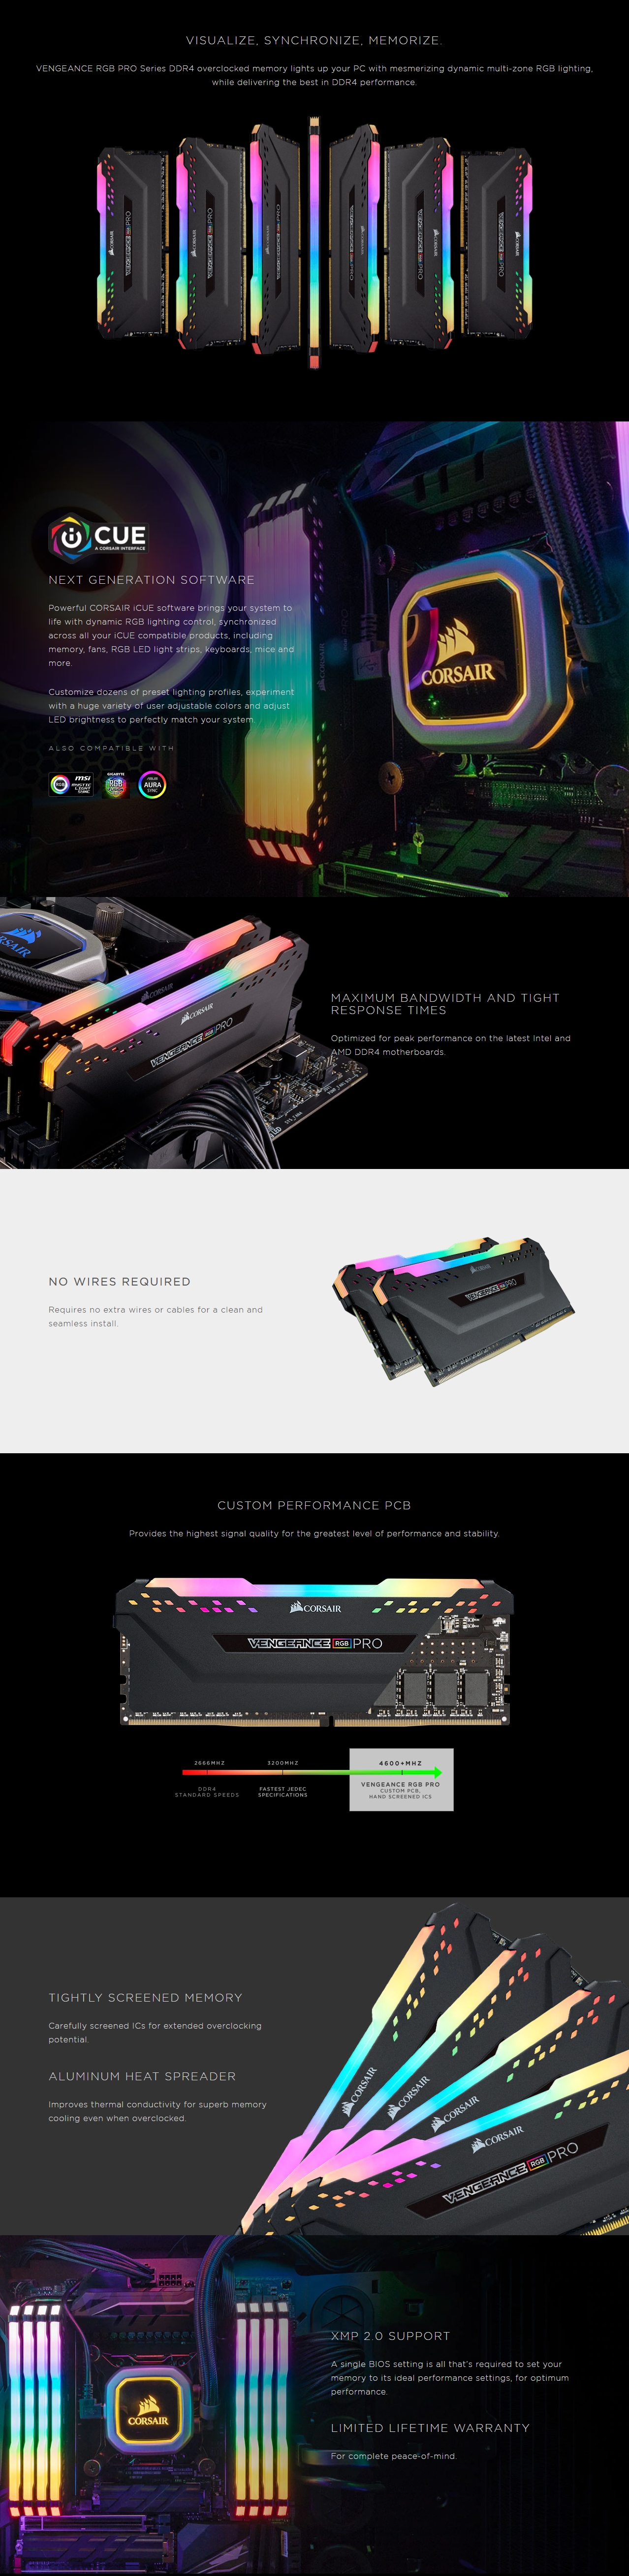 A large marketing image providing additional information about the product Corsair 32GB Kit (2x16GB) DDR4 Vengeance RGB Pro C16 3200MHz - Black - Additional alt info not provided